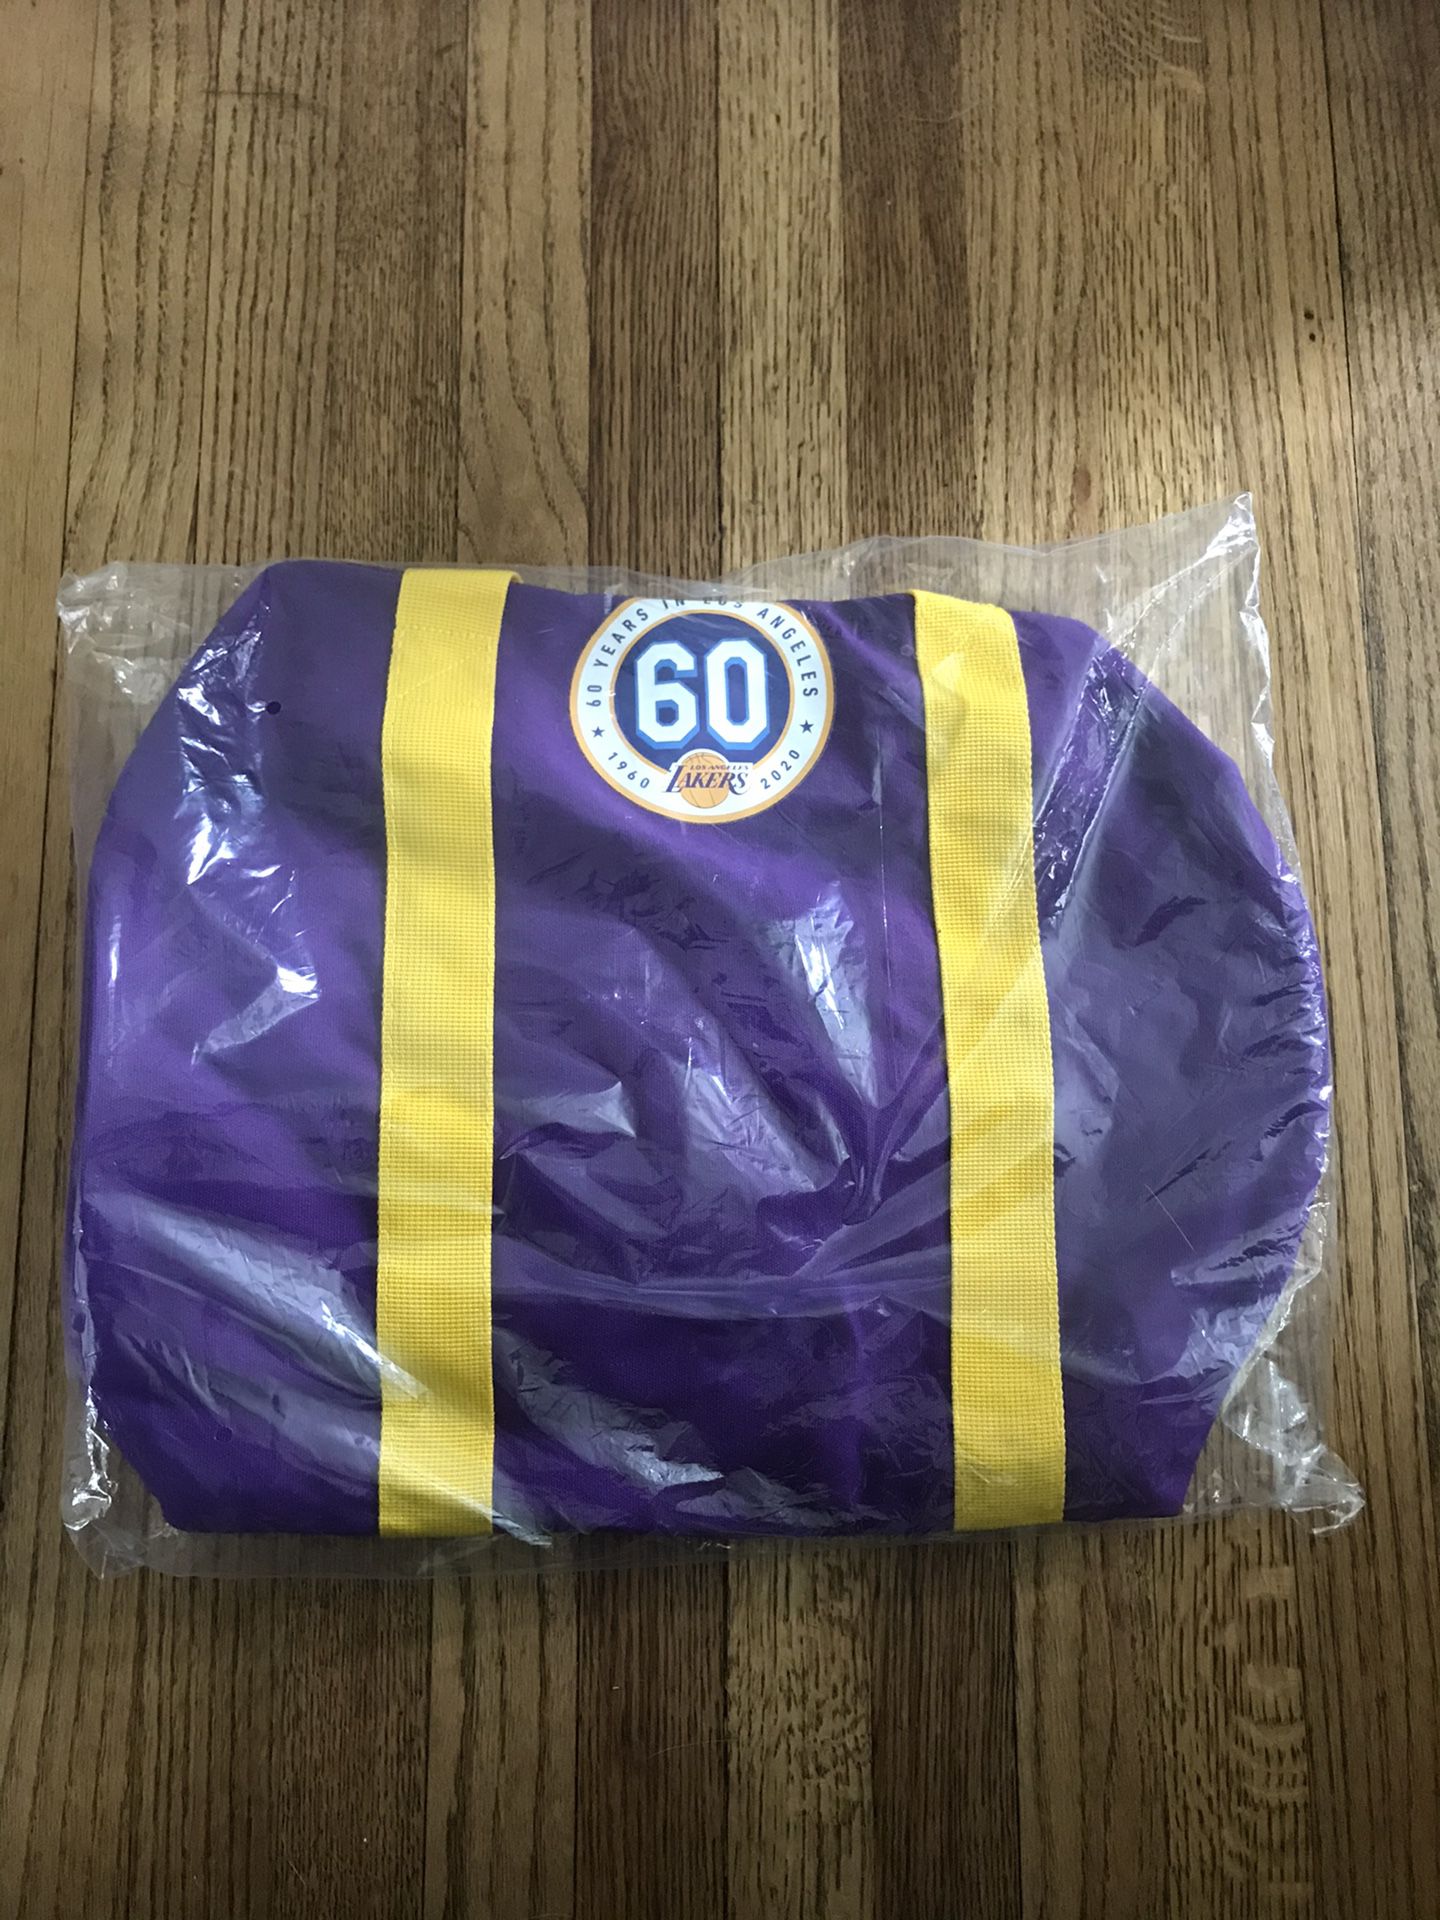 NEW Lakers duffle bag 60th anniversary edition